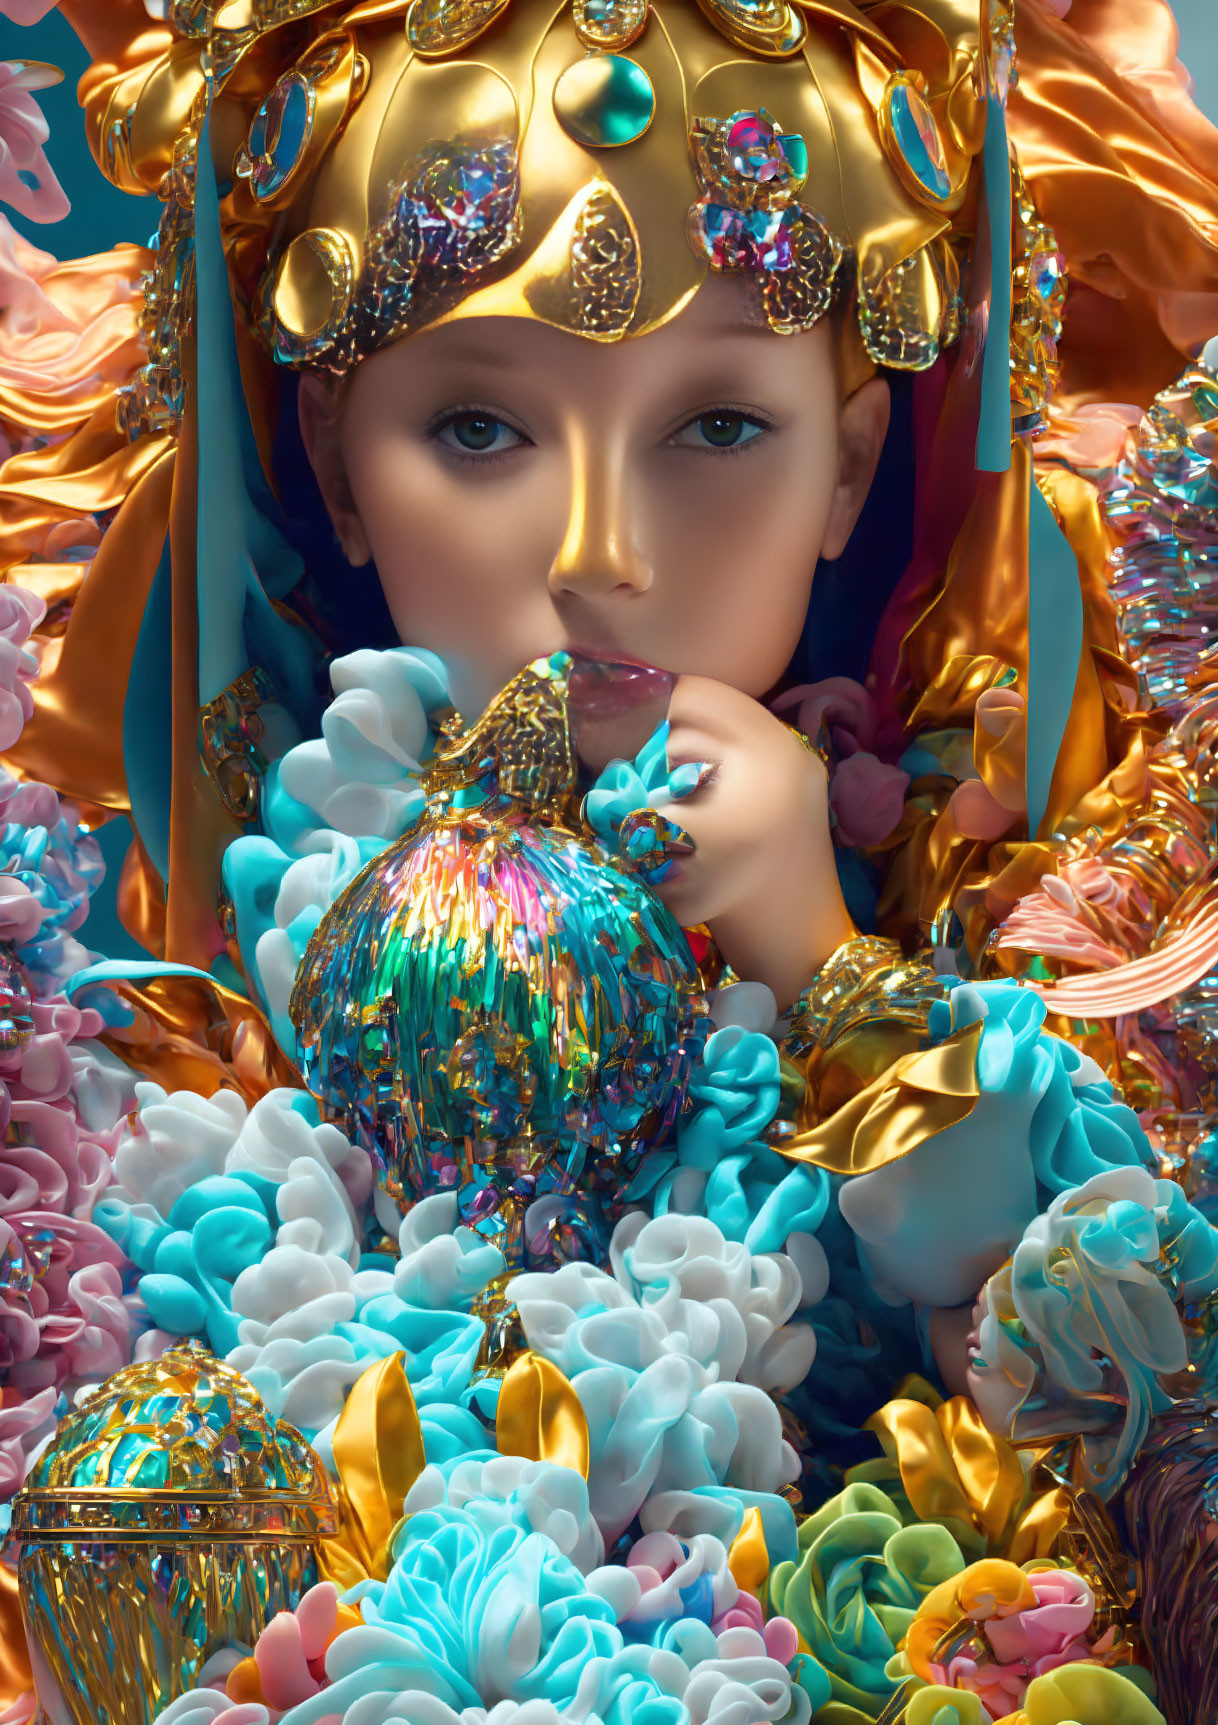 Surreal portrait of figure with pale skin in golden headdress surrounded by vibrant flowers